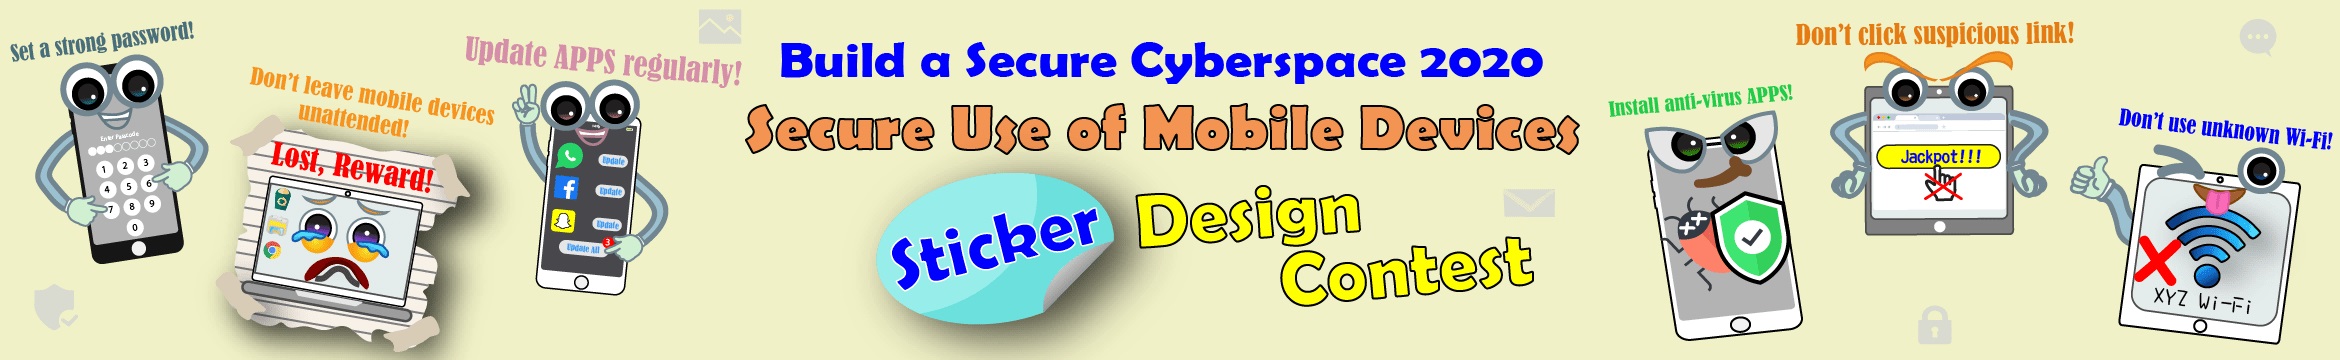 “Secure Use of Mobile Devices” Sticker Design Contest